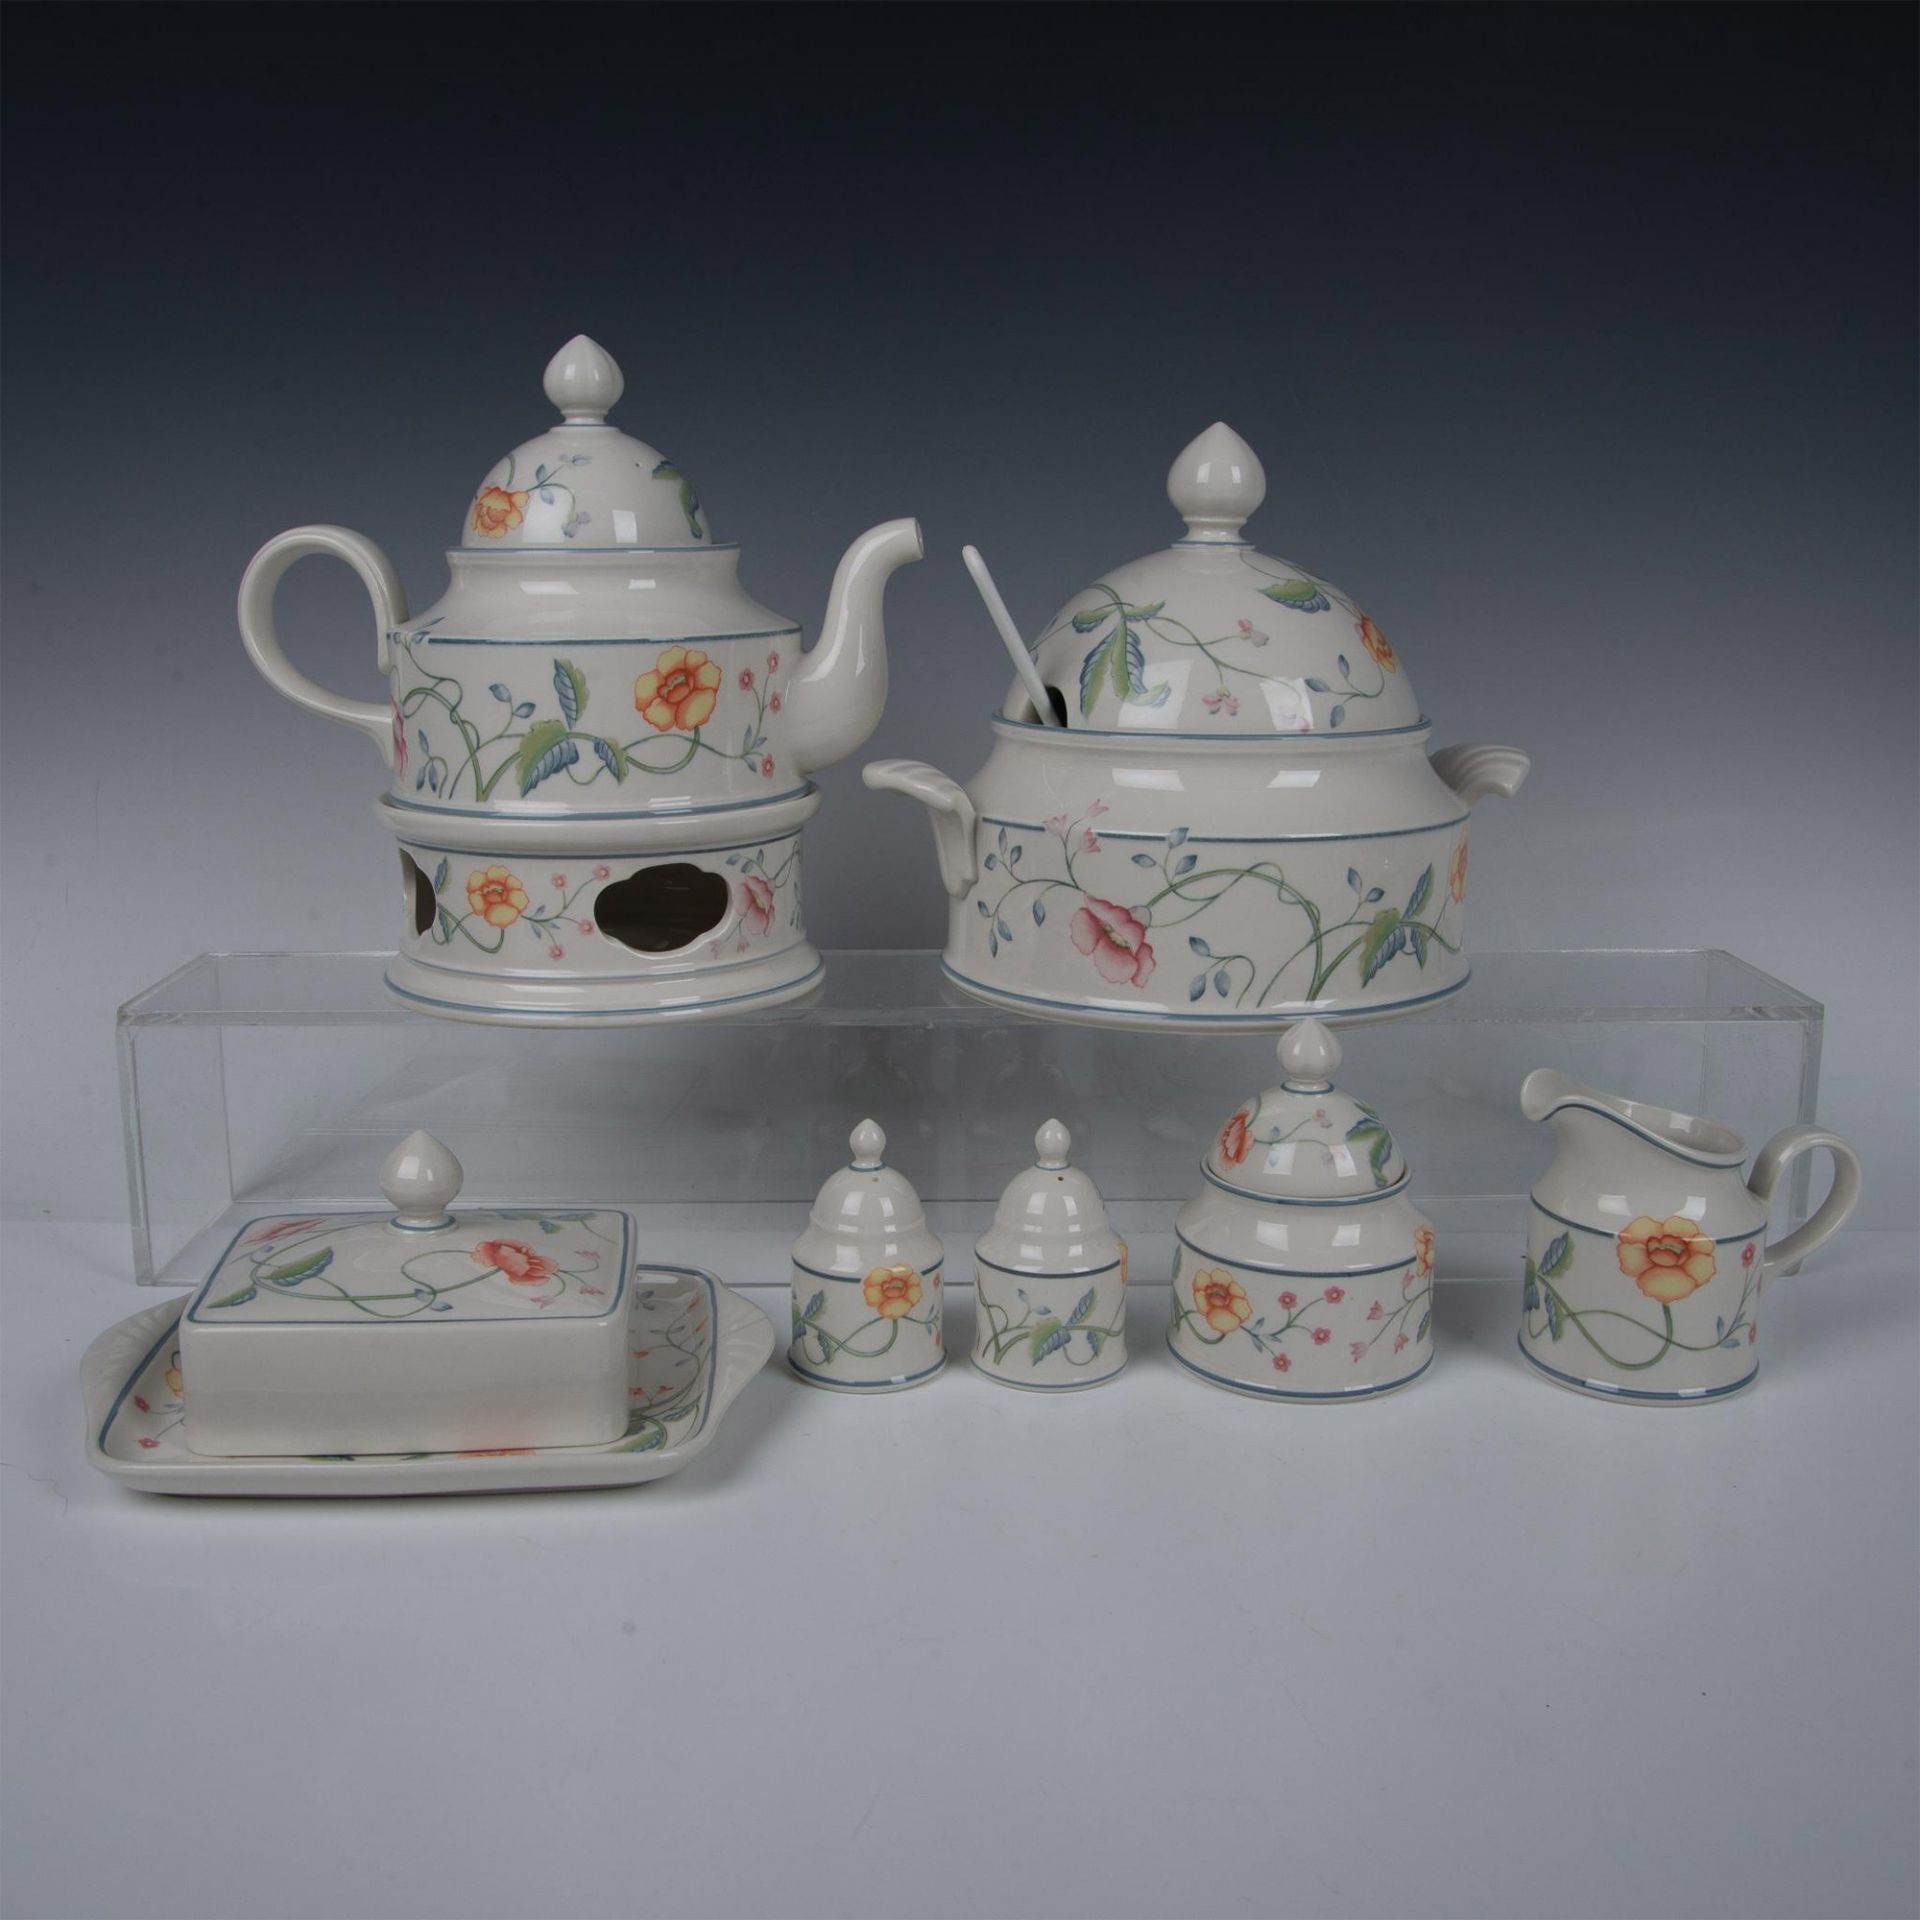 7pc Villeroy and Boch Tableware Grouping, Albertina Pattern - Image 3 of 9